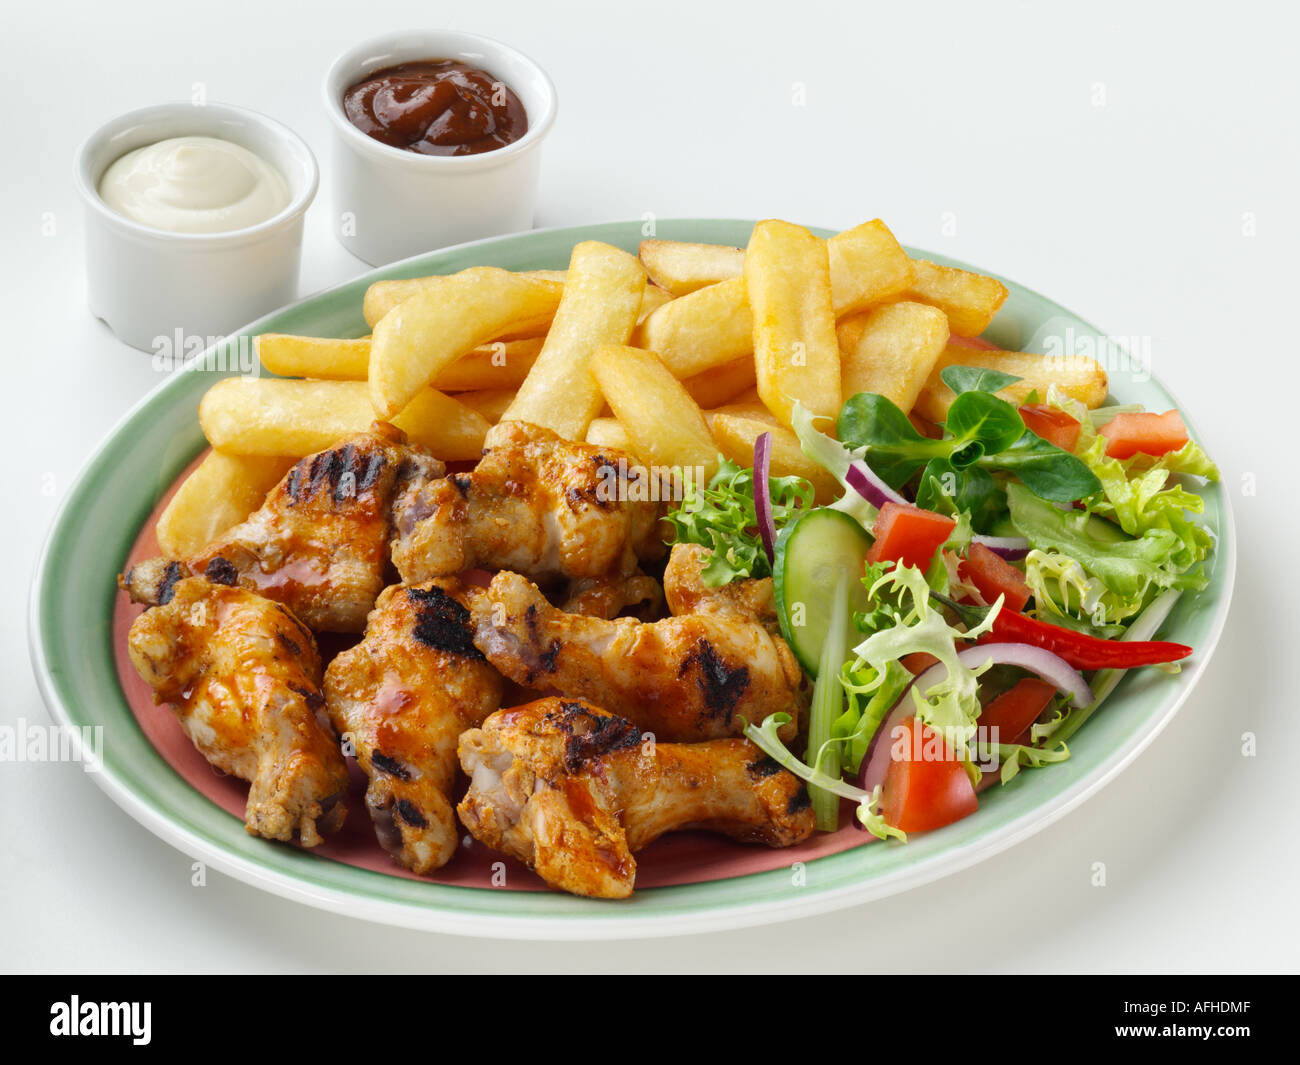 Chicken wings French fries and salad Stock Photo